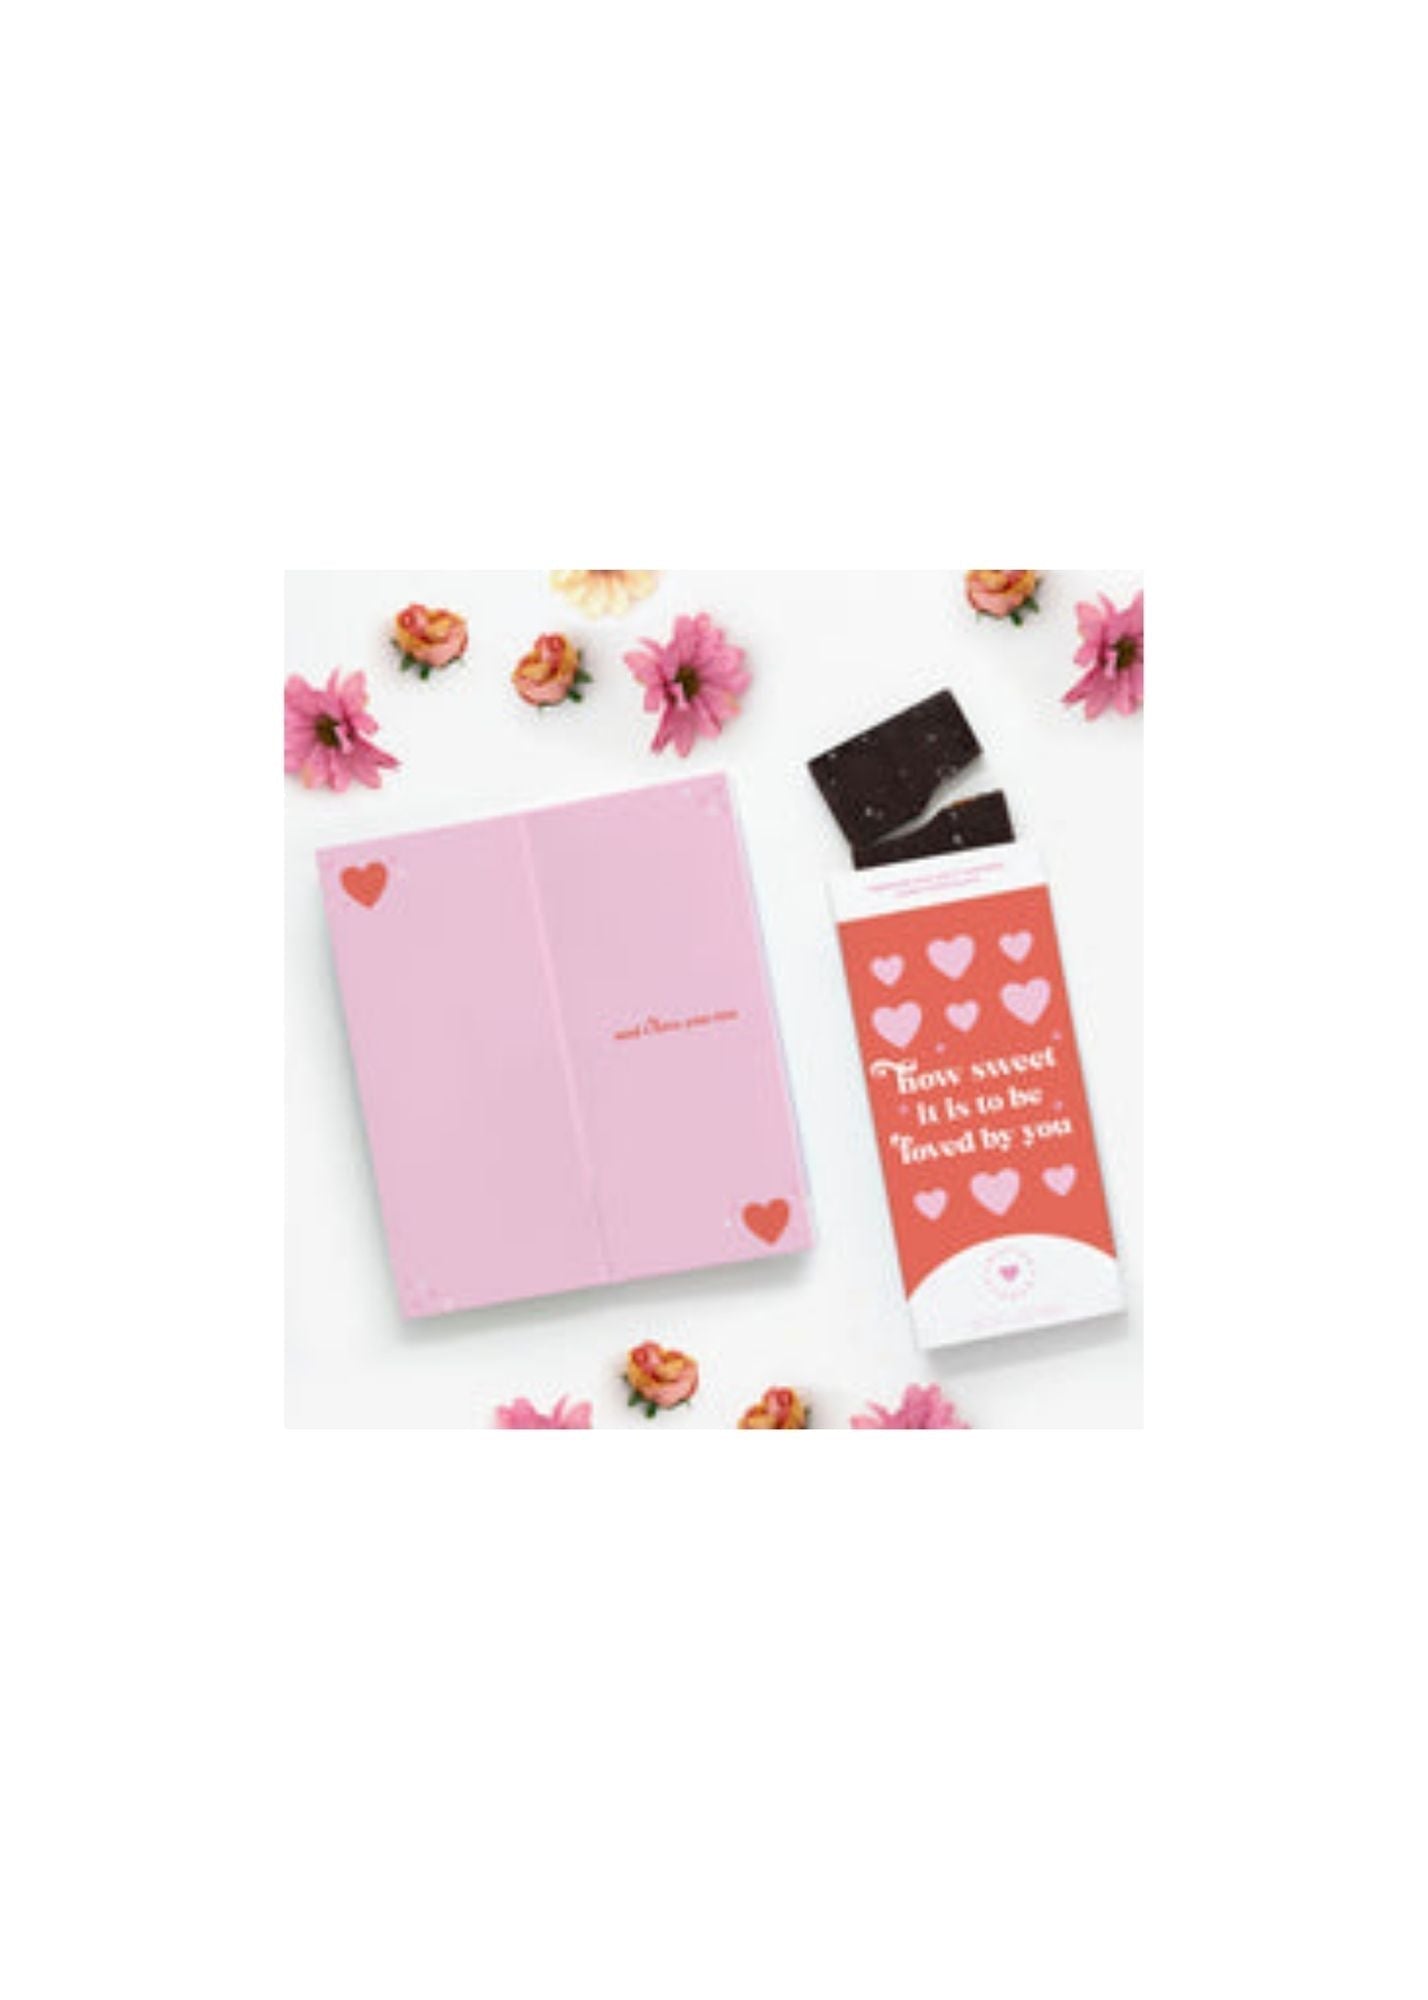 How Sweet It is to Be Loved by You Chocolate Greeting Card Home & Lifestyle Sweeter Cards - Chocolate Bar Greeting Cards